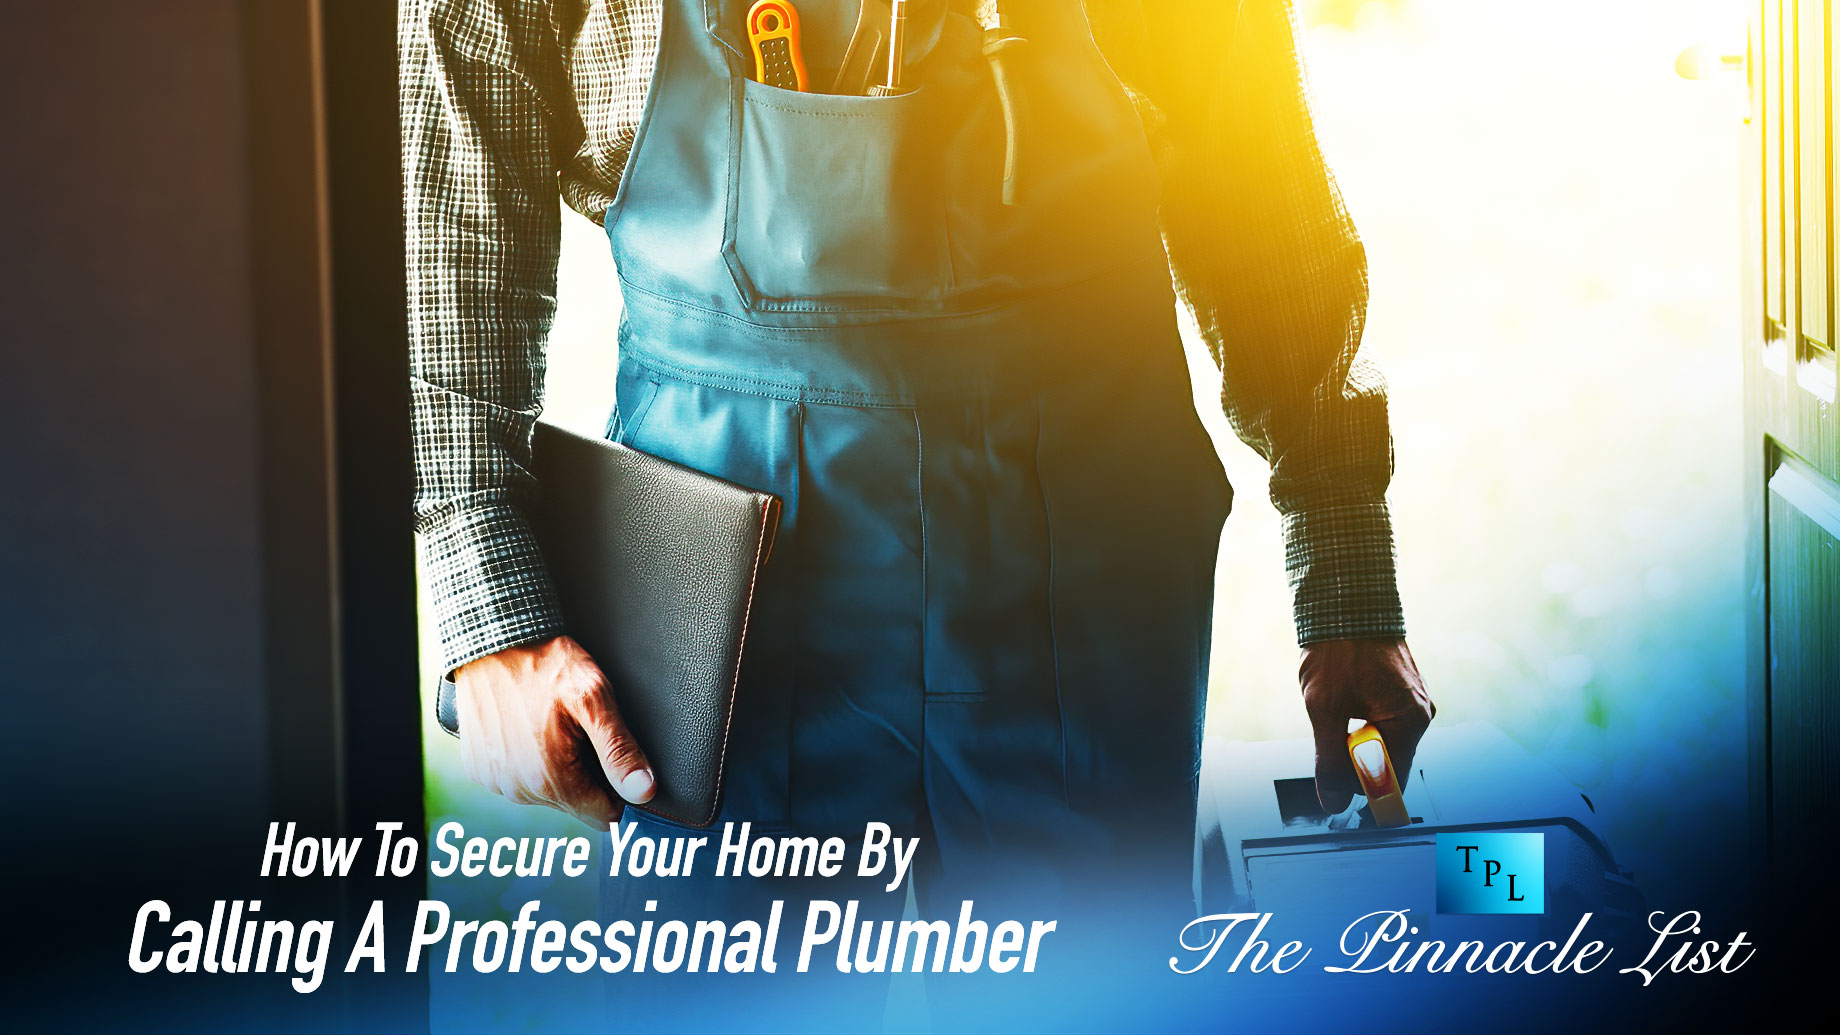 How To Secure Your Home By Calling A Professional Plumber